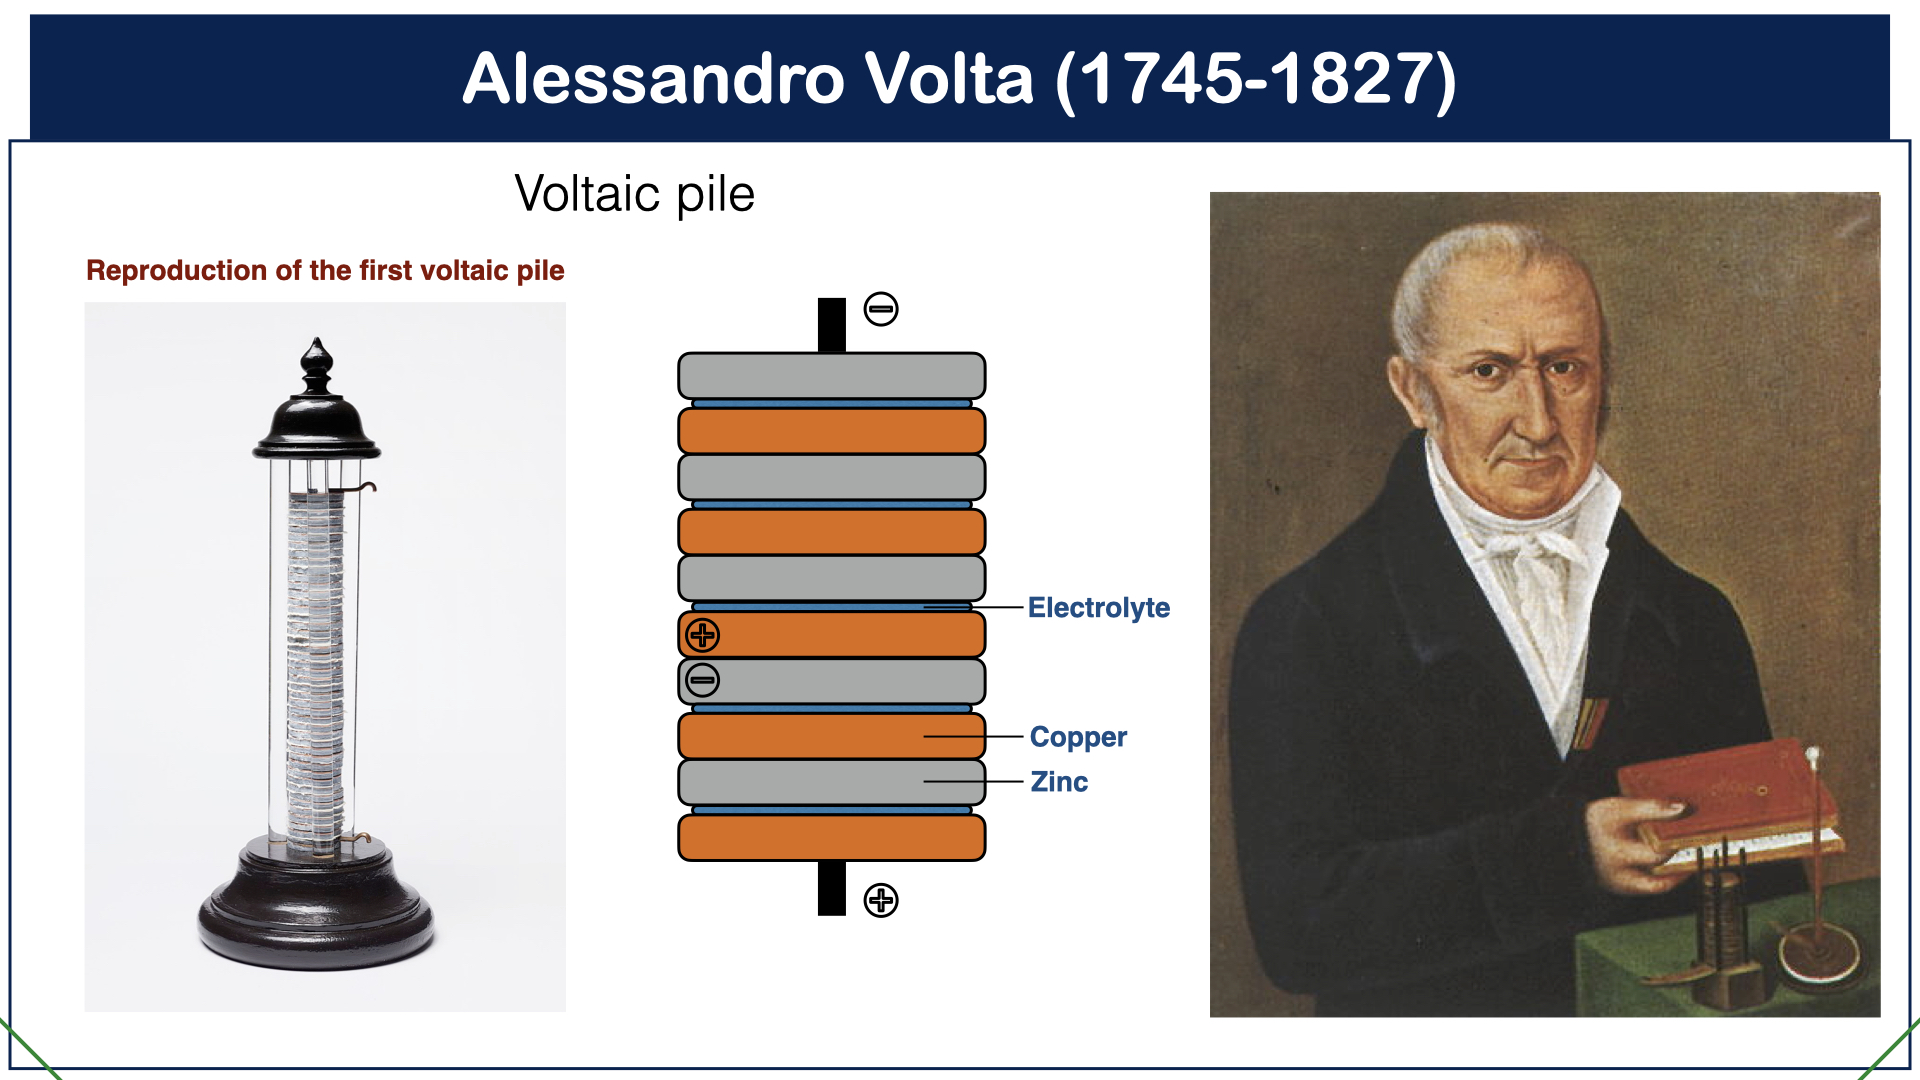 François Levrier on X: "Alessandro Volta was born #OTD in 1745. His invention of the voltaic pile in 1799 proved that electricity could be generated chemically. This pioneering work quickly led to